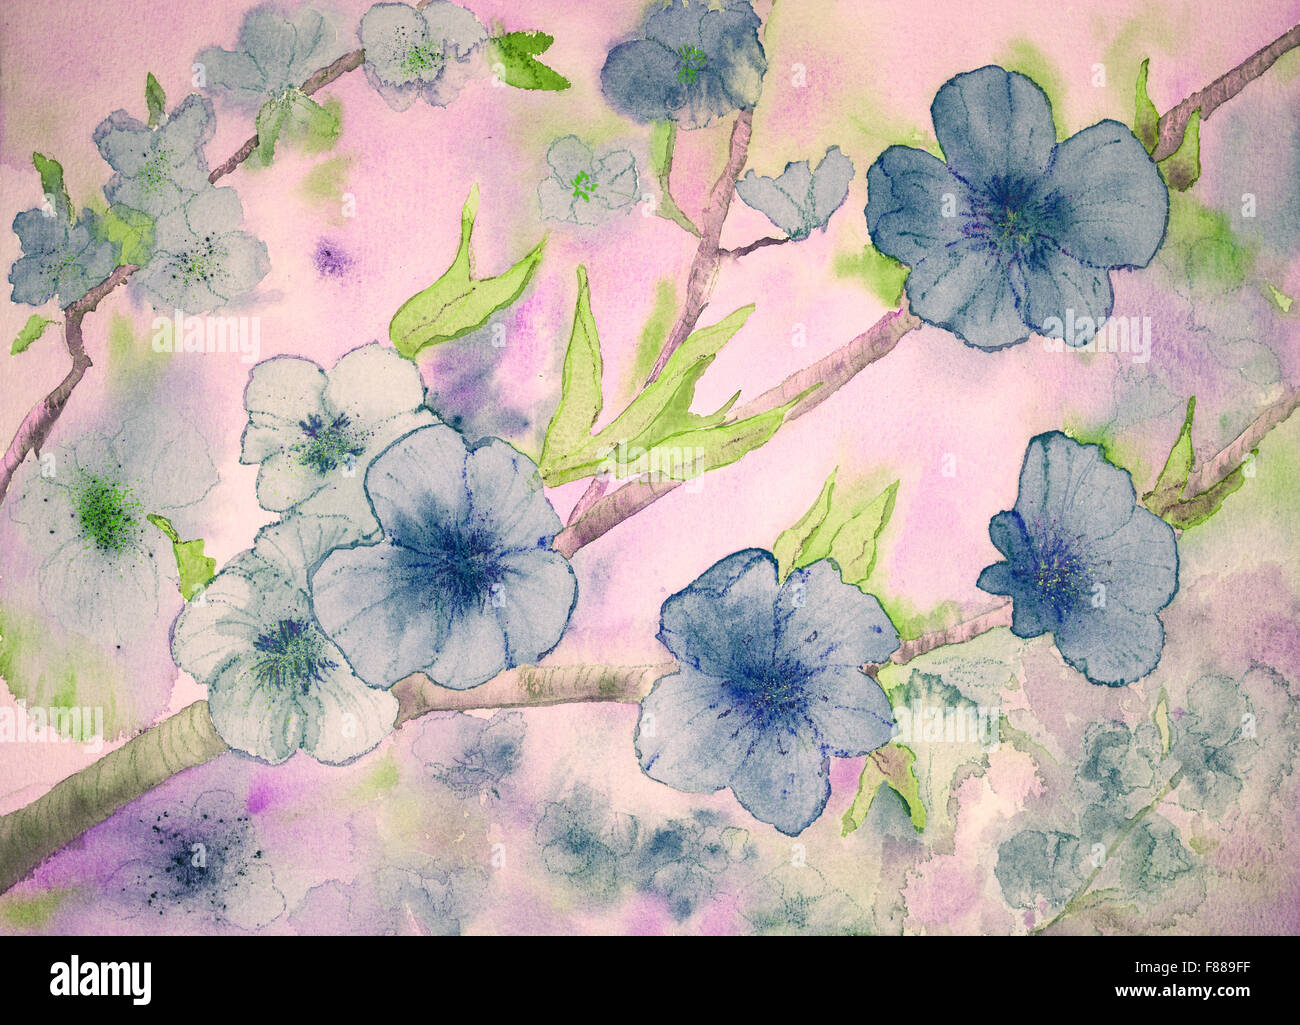 Fantasy of blue flowers against a pinkish background. The dabbing technique gives a soft focus effect due to the altered surface Stock Photo